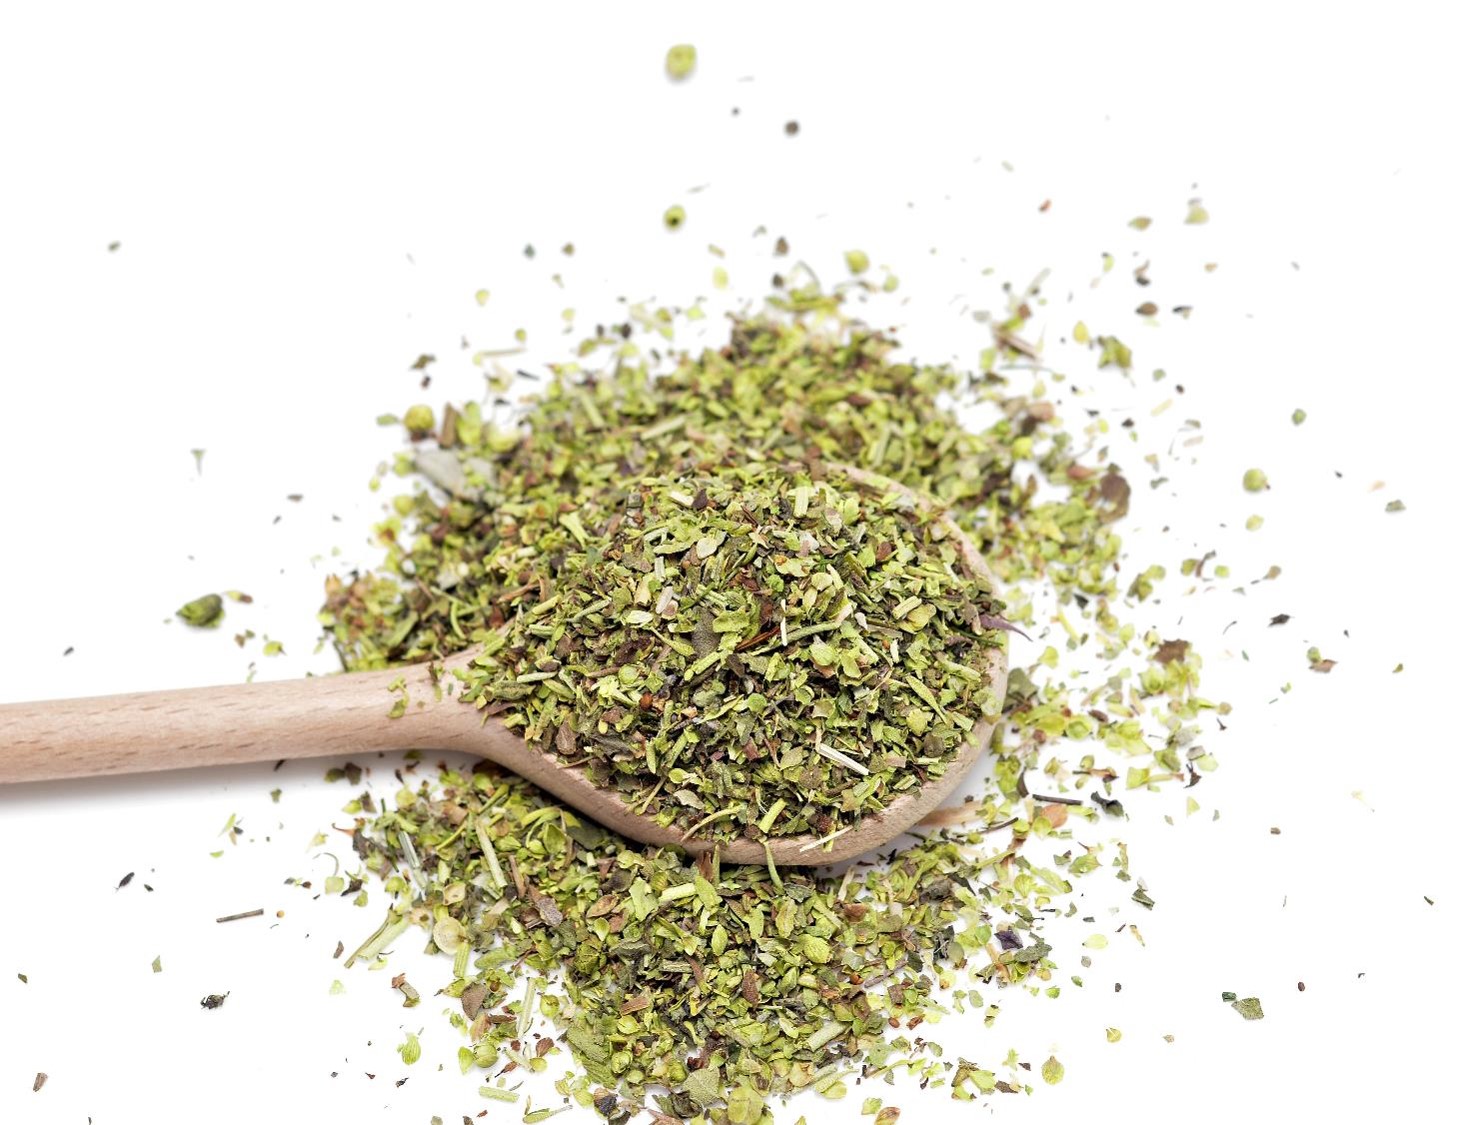 FIND OUT MORE ABOUT HERBES DE PROVENCE